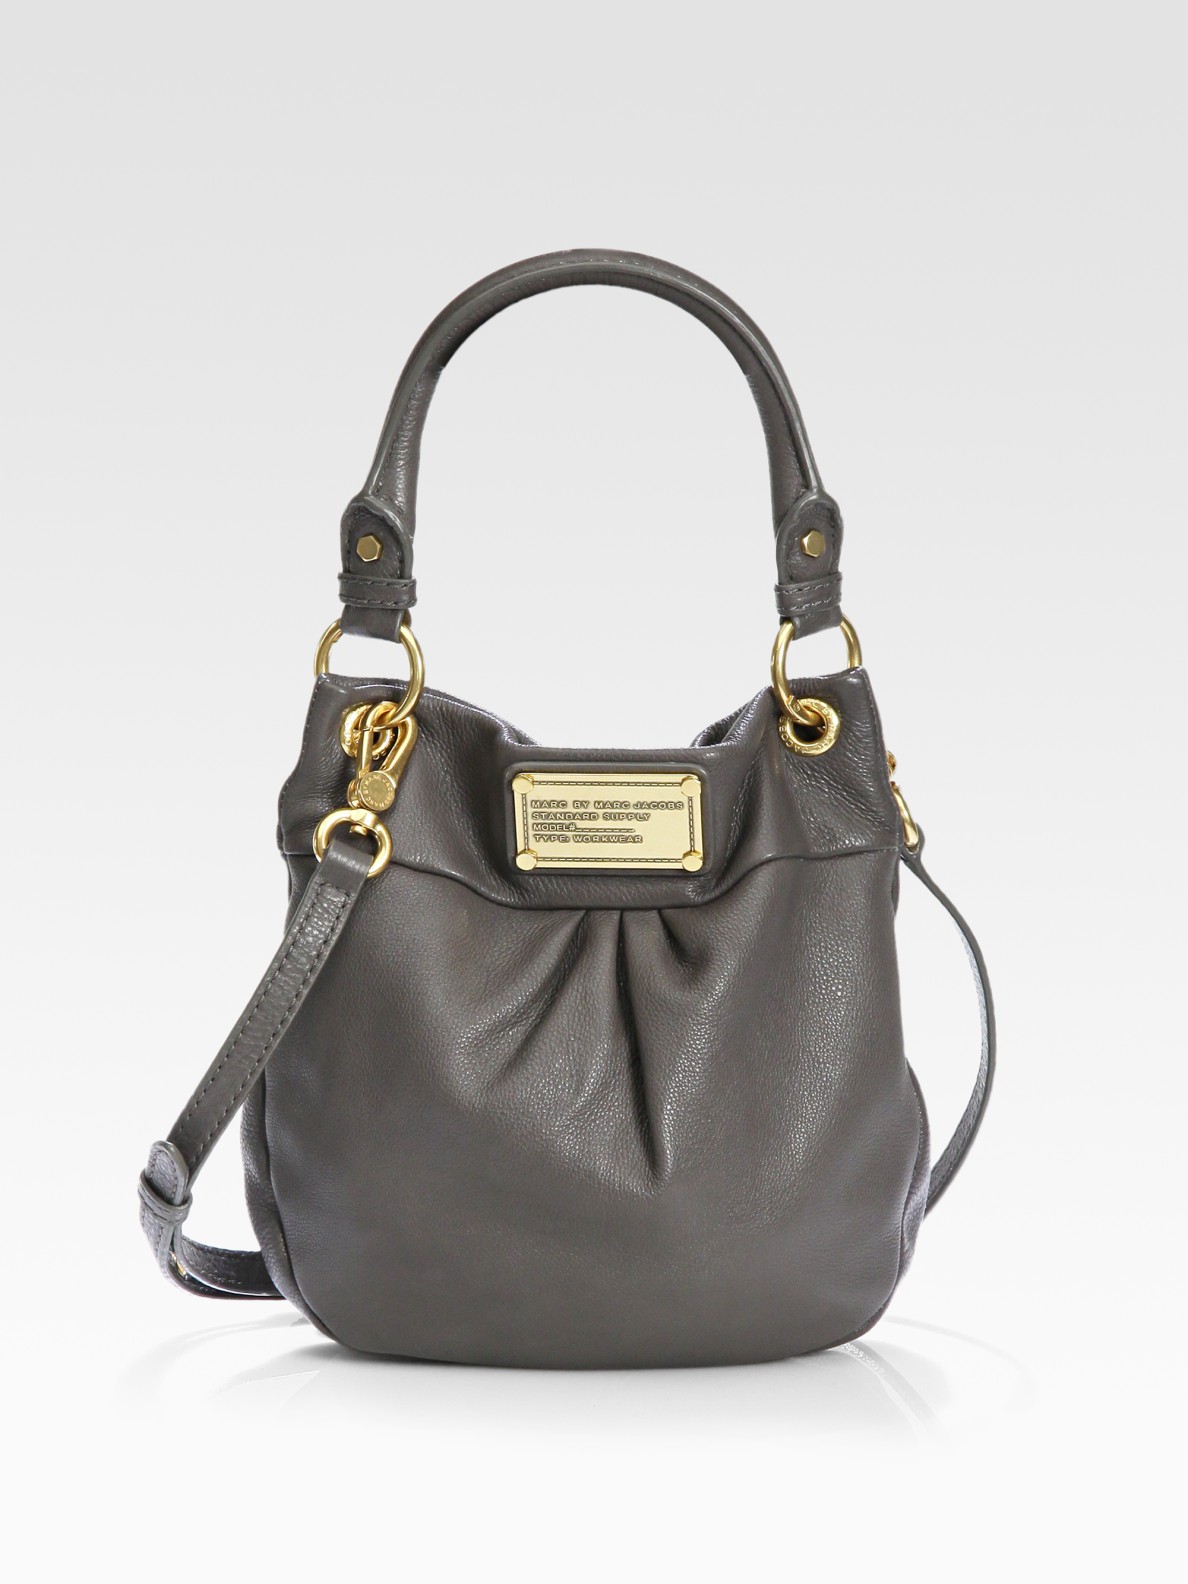 Marc By Marc Jacobs Classic Q Mini Hillier Hobo Bag in Black - Lyst